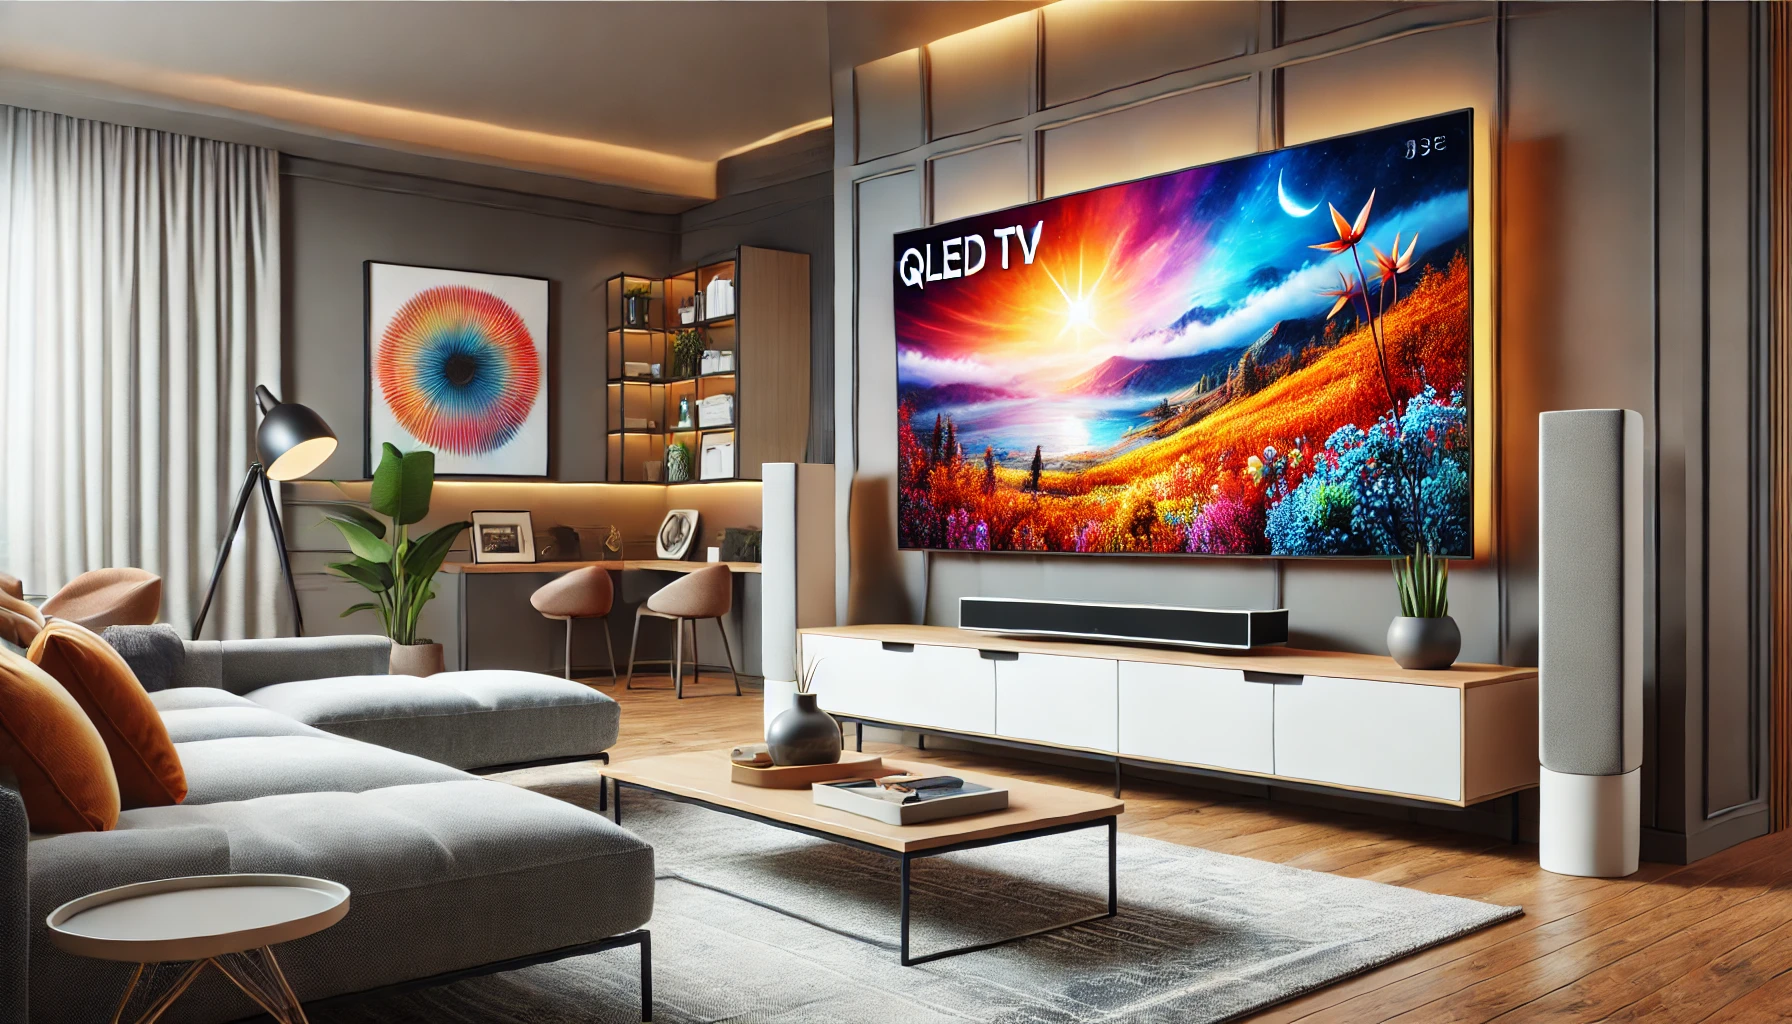 What Type of TV Should I Buy?